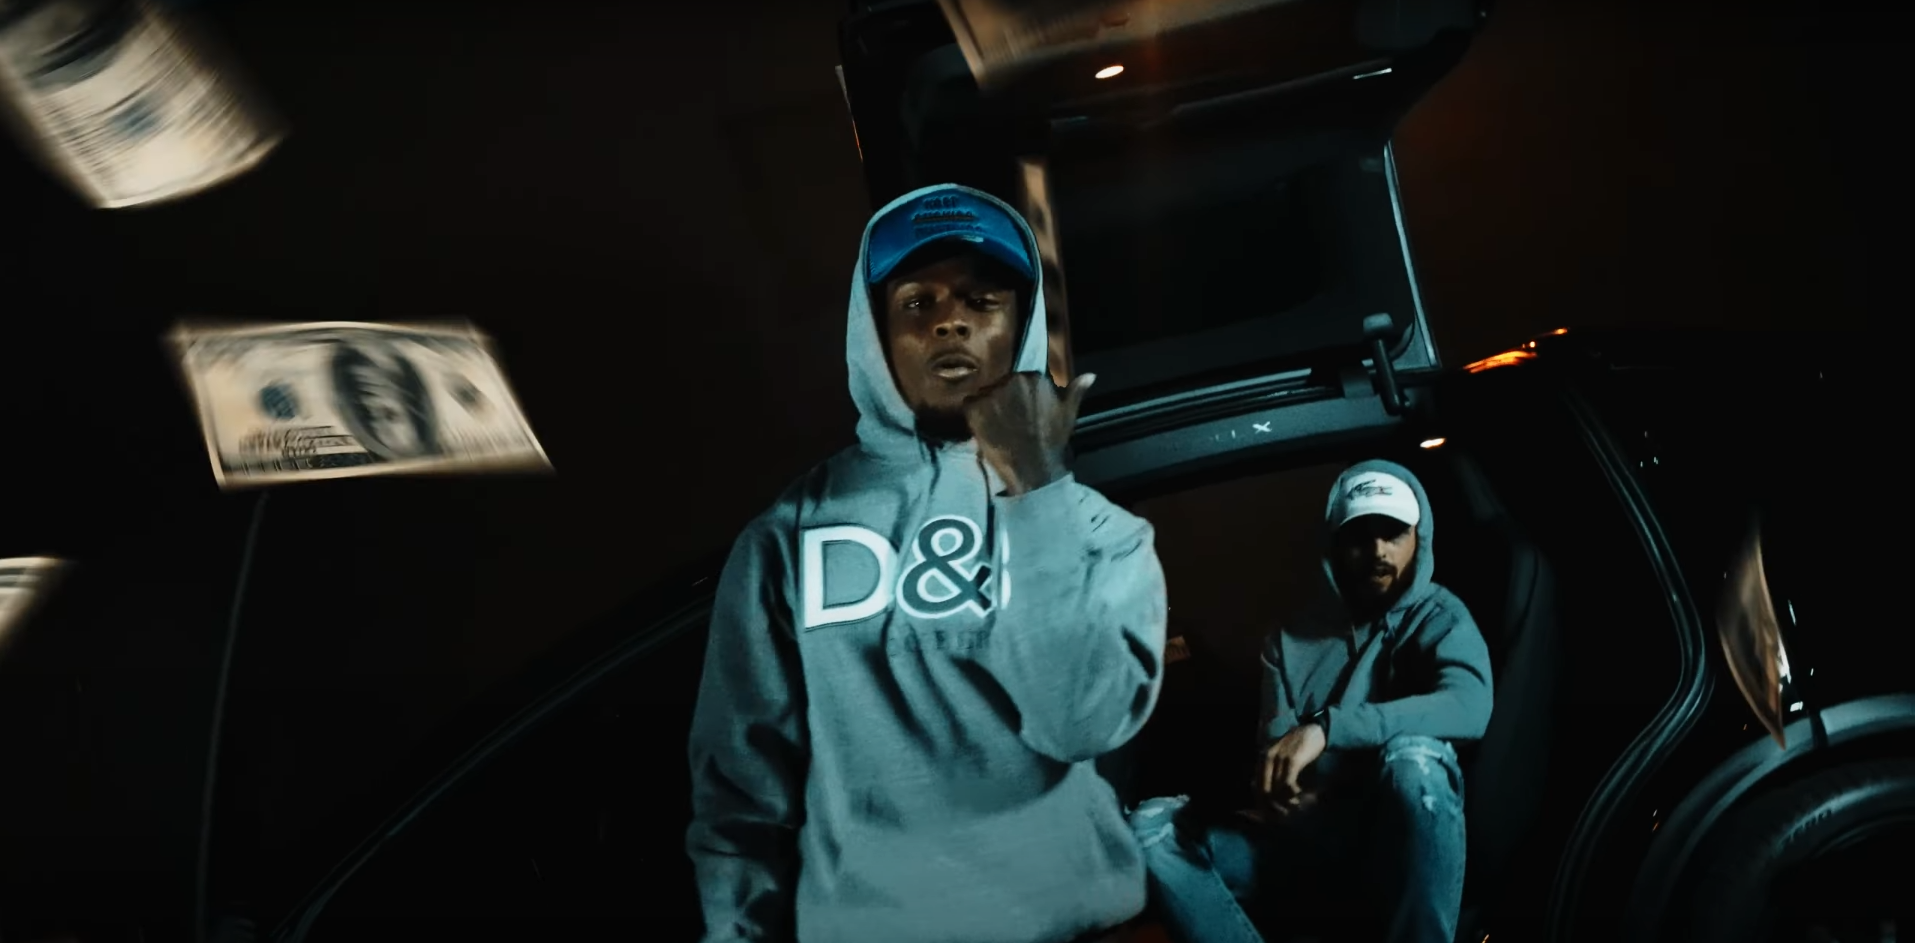 Lil Dmac has dropped a brand new single with a music video titled, ‘Do It For Momma.’